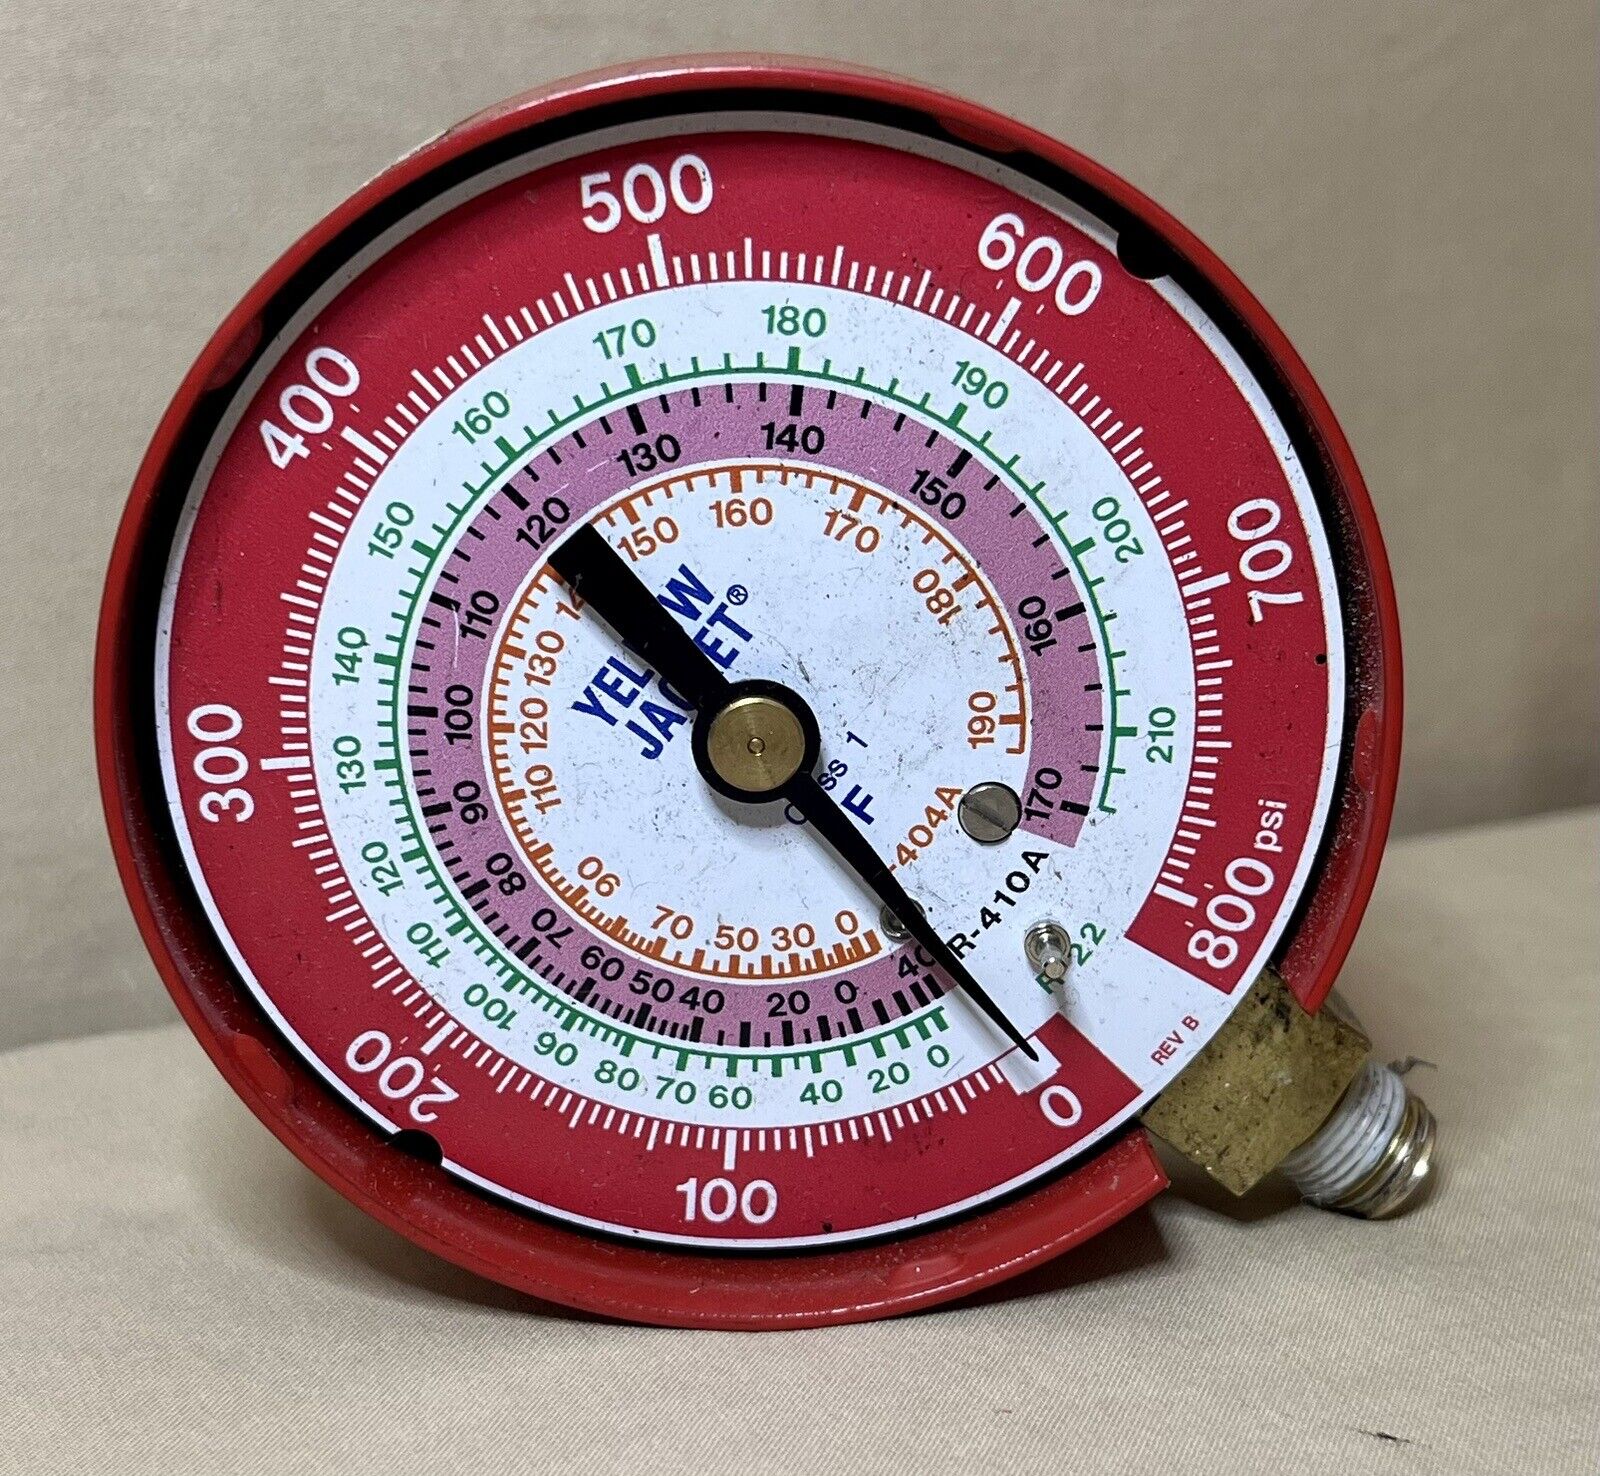 Ritchie Engineering Co., Inc. YELLOW JACKET RITCHIE LIQ/FILLED RED GAUGE F-404A